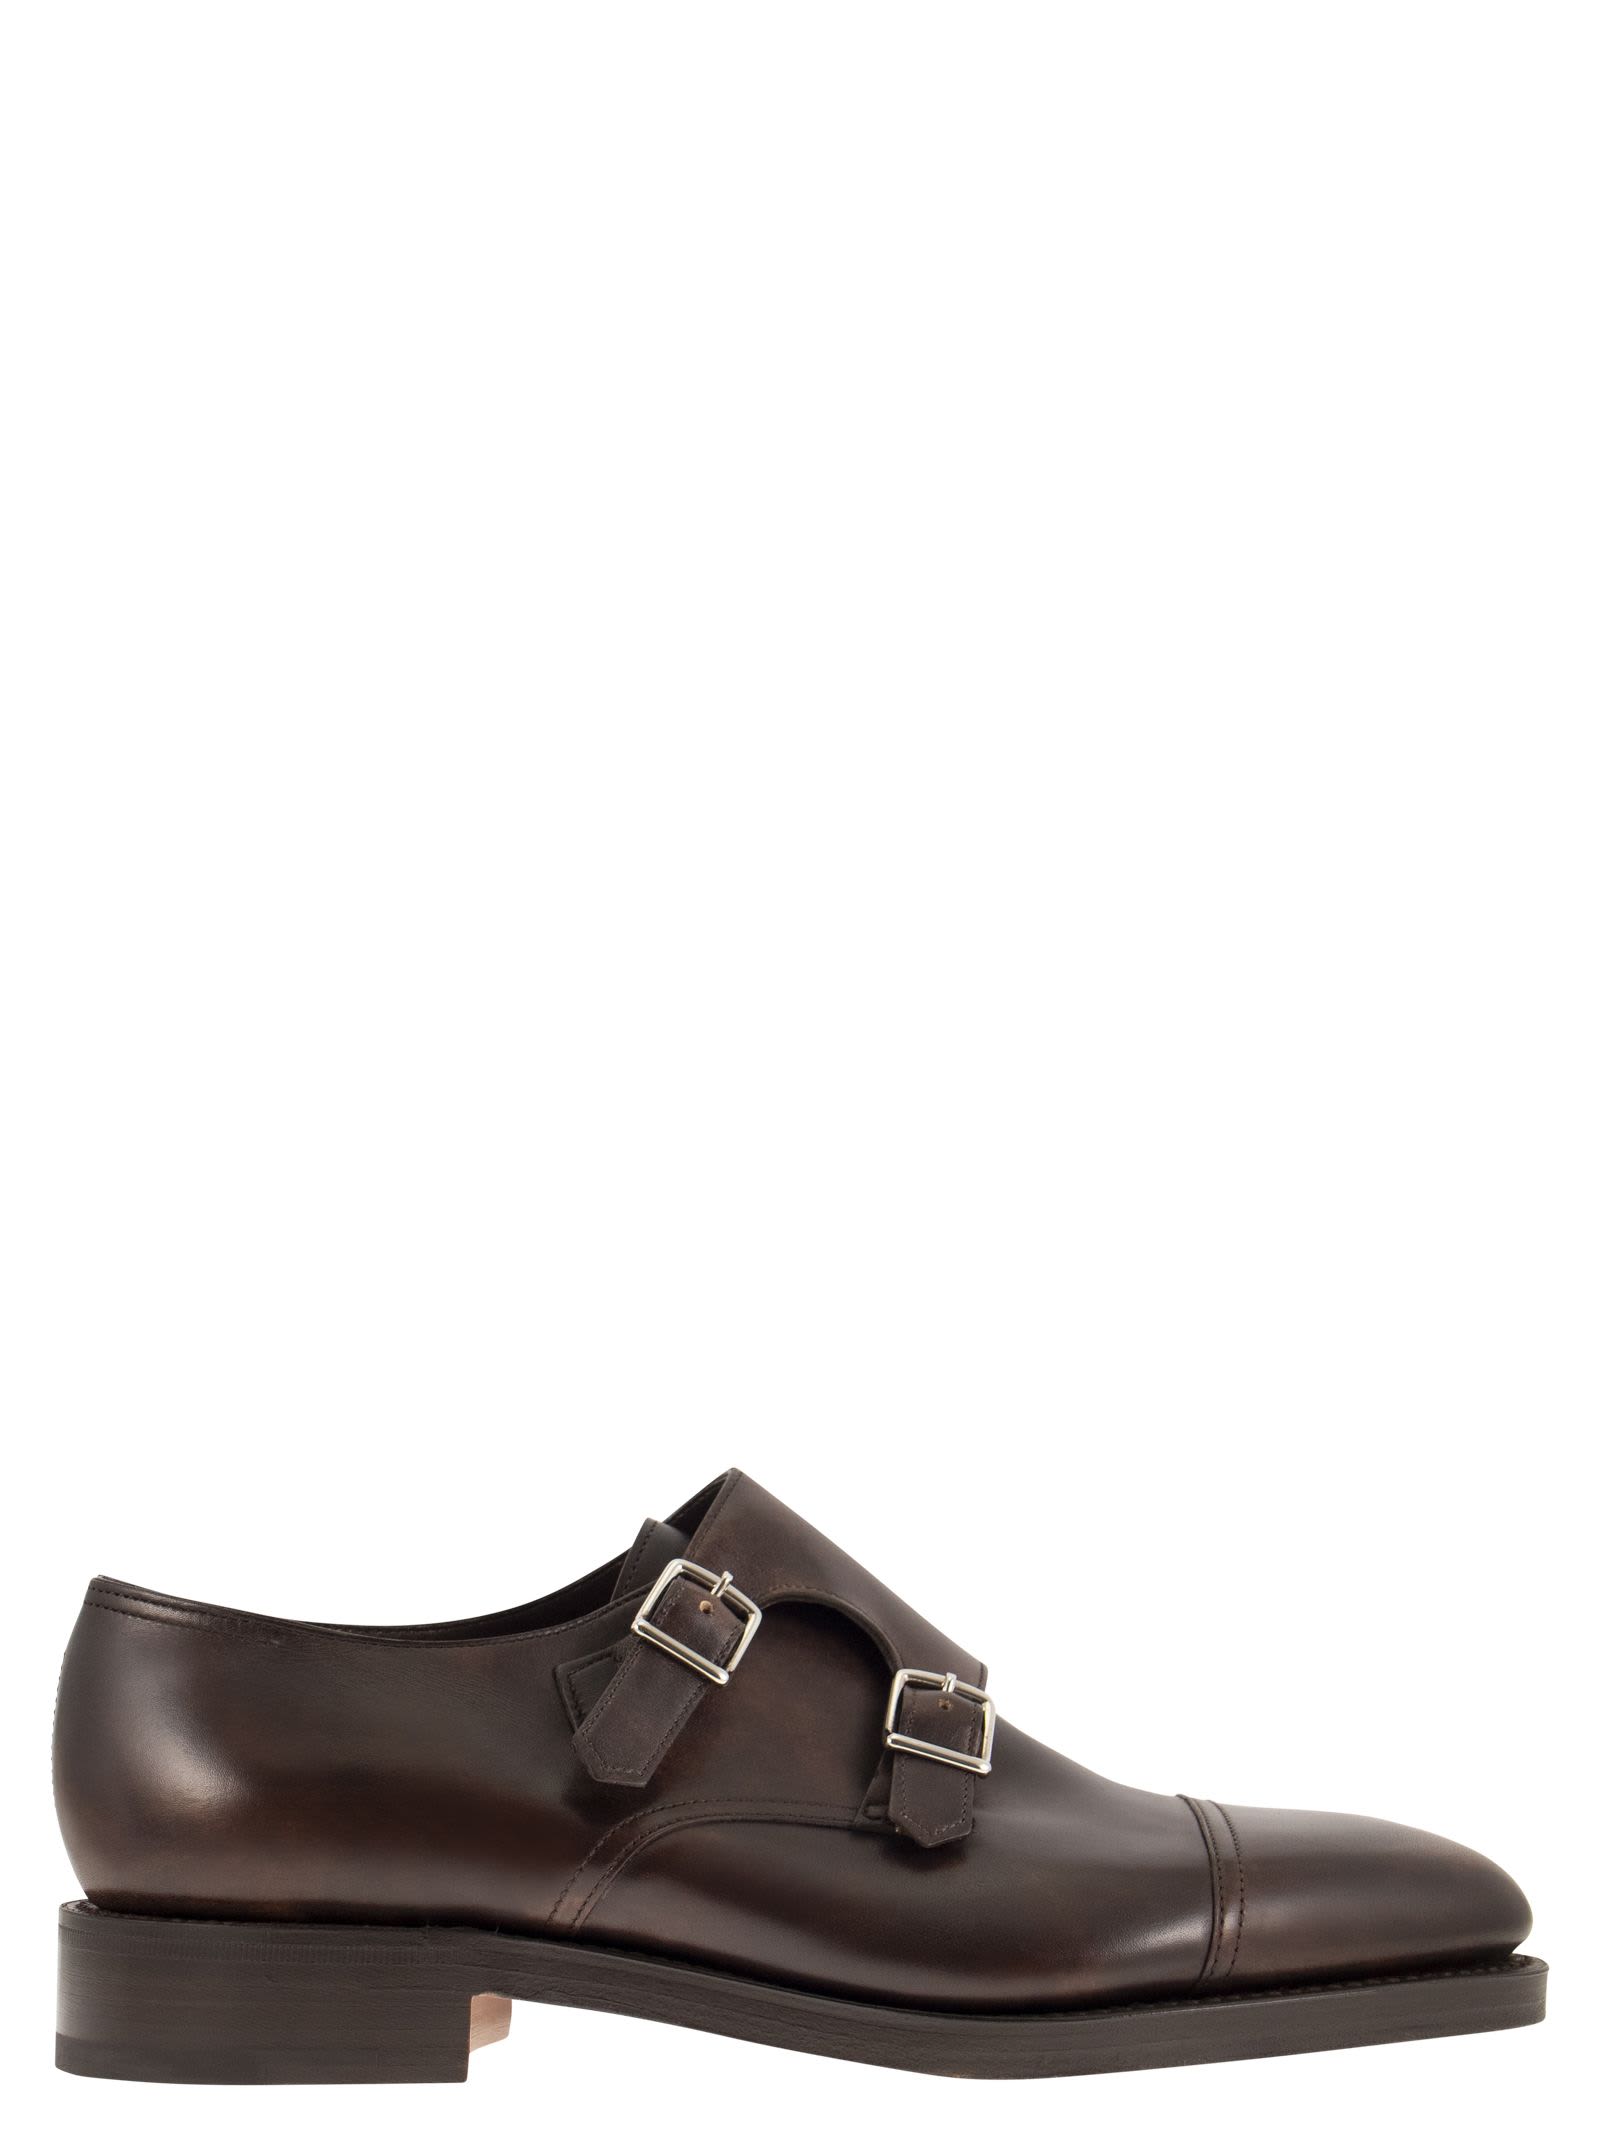 john lobb william - shoe with double buckle